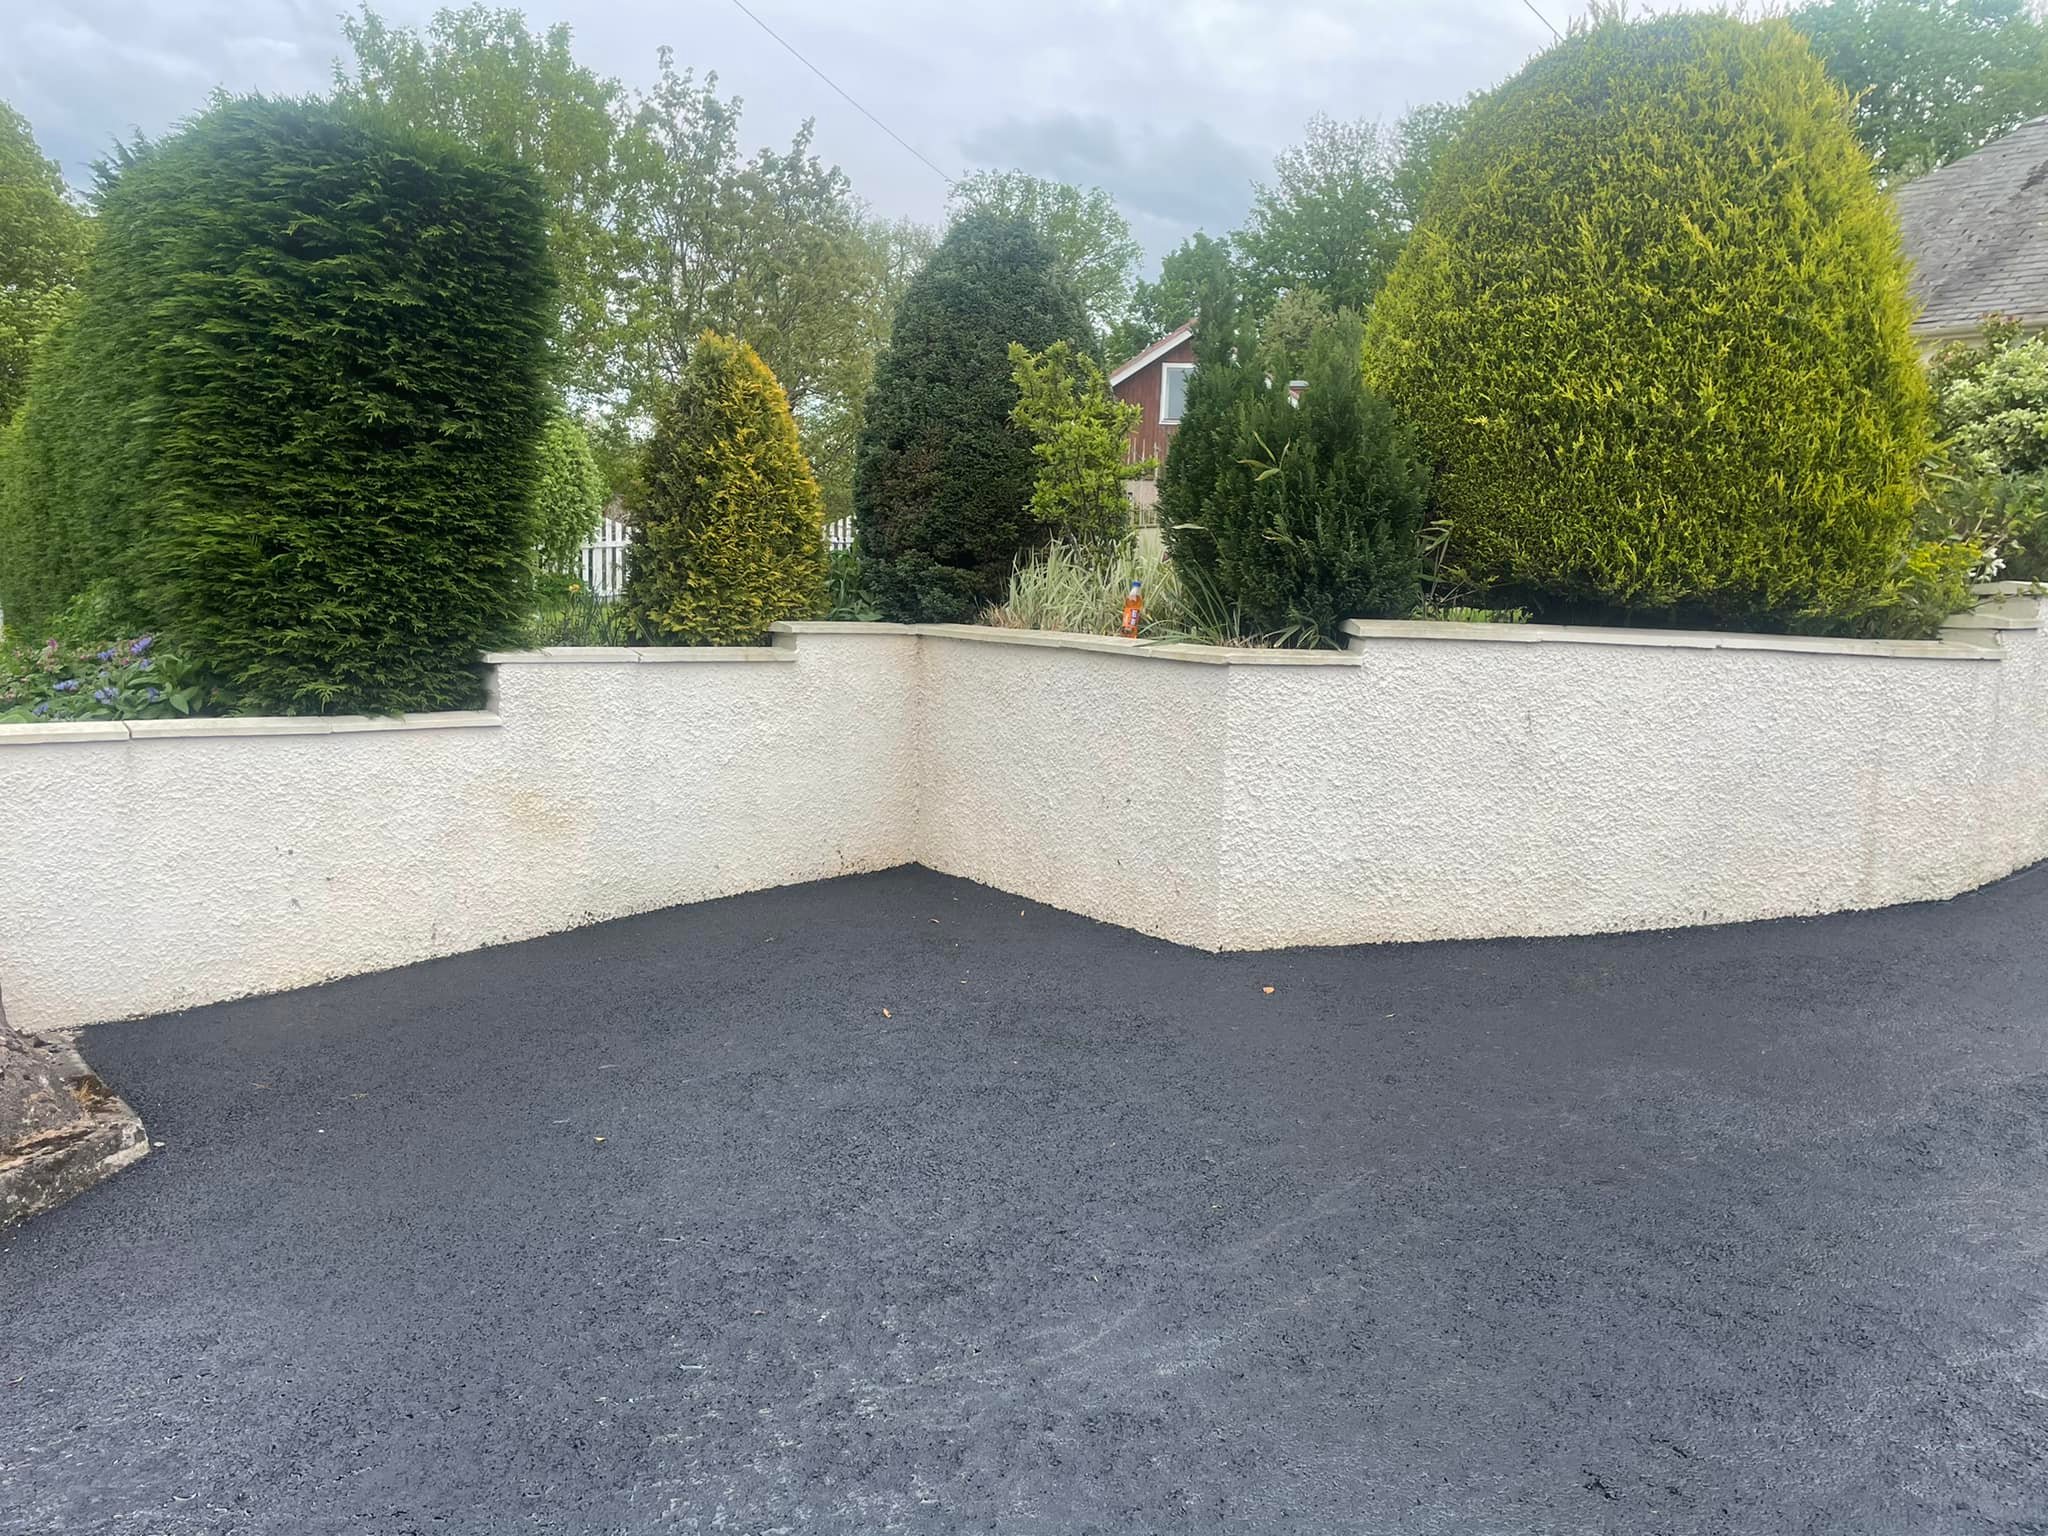 Get a New Tarmac Driveway for Bungalow